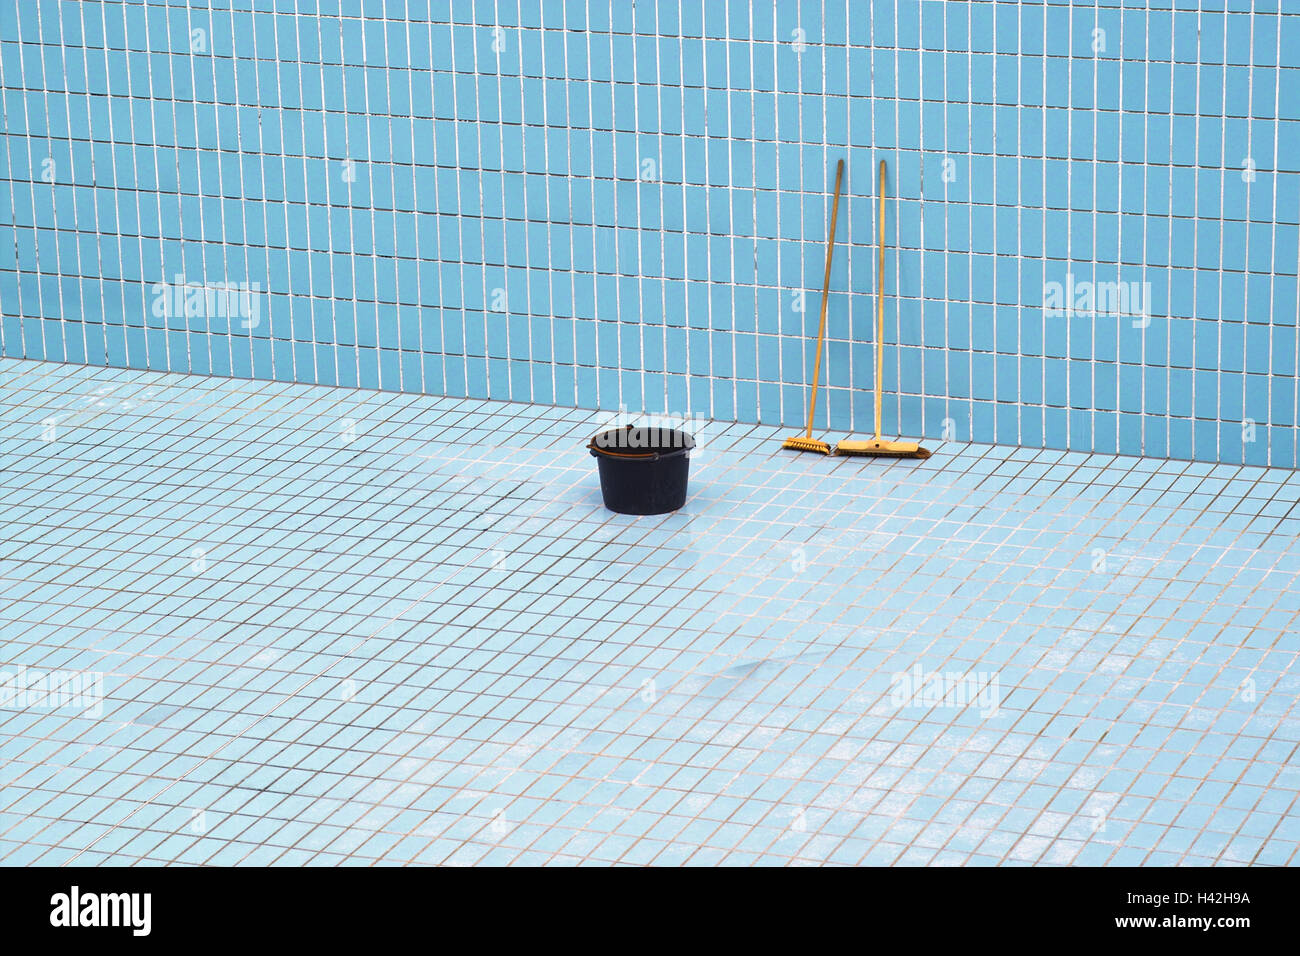 Image result for bucket in empty pool